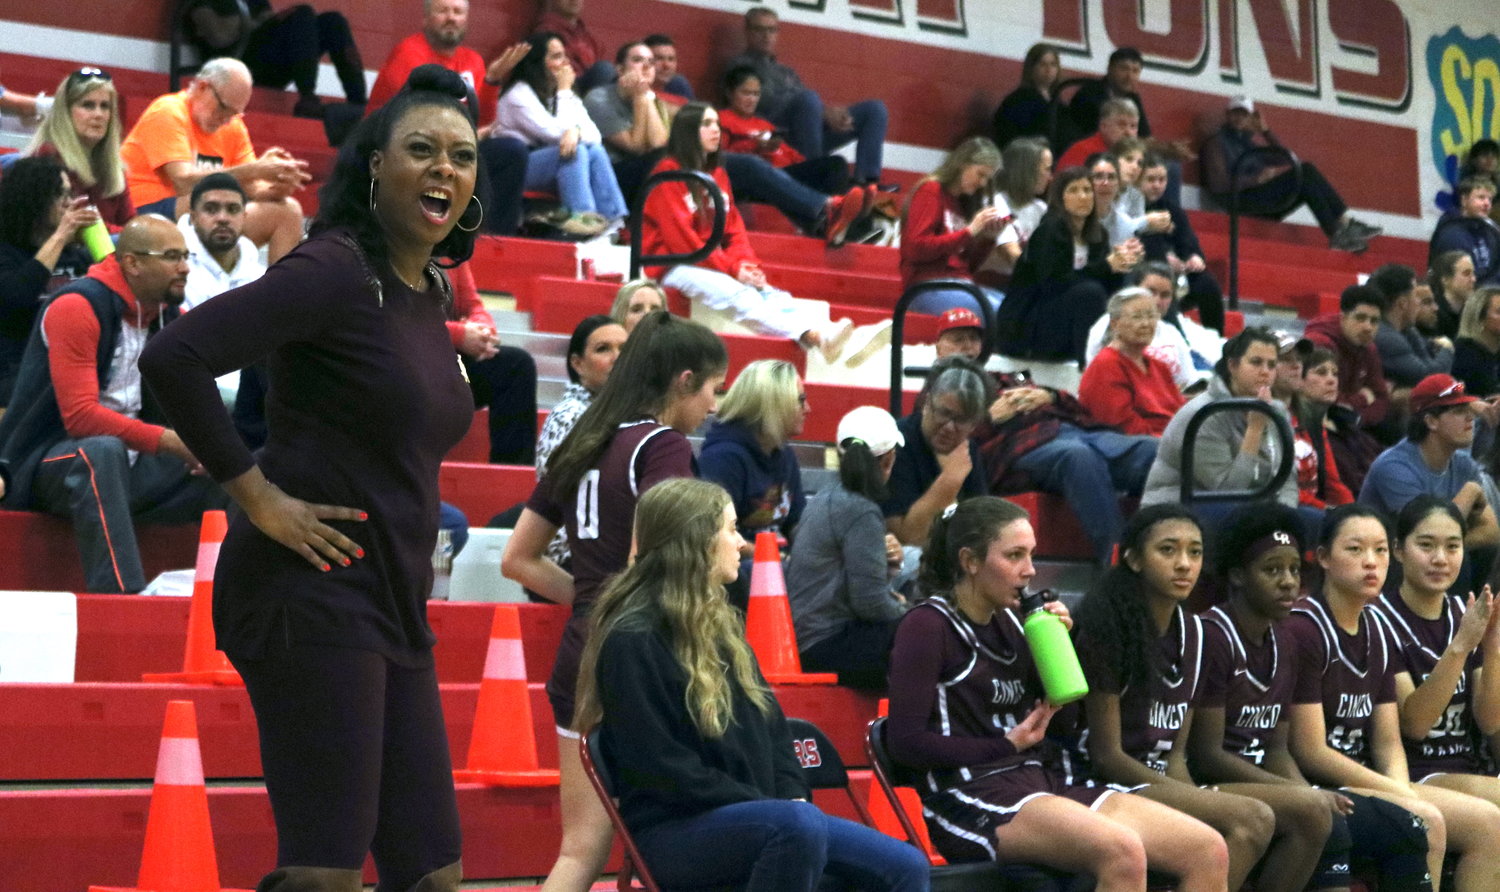 Cinco Ranch head coach Tamara Collier talks to a player during Tuesday’s game between Katy and Cinco Ranch at the Katy gym.